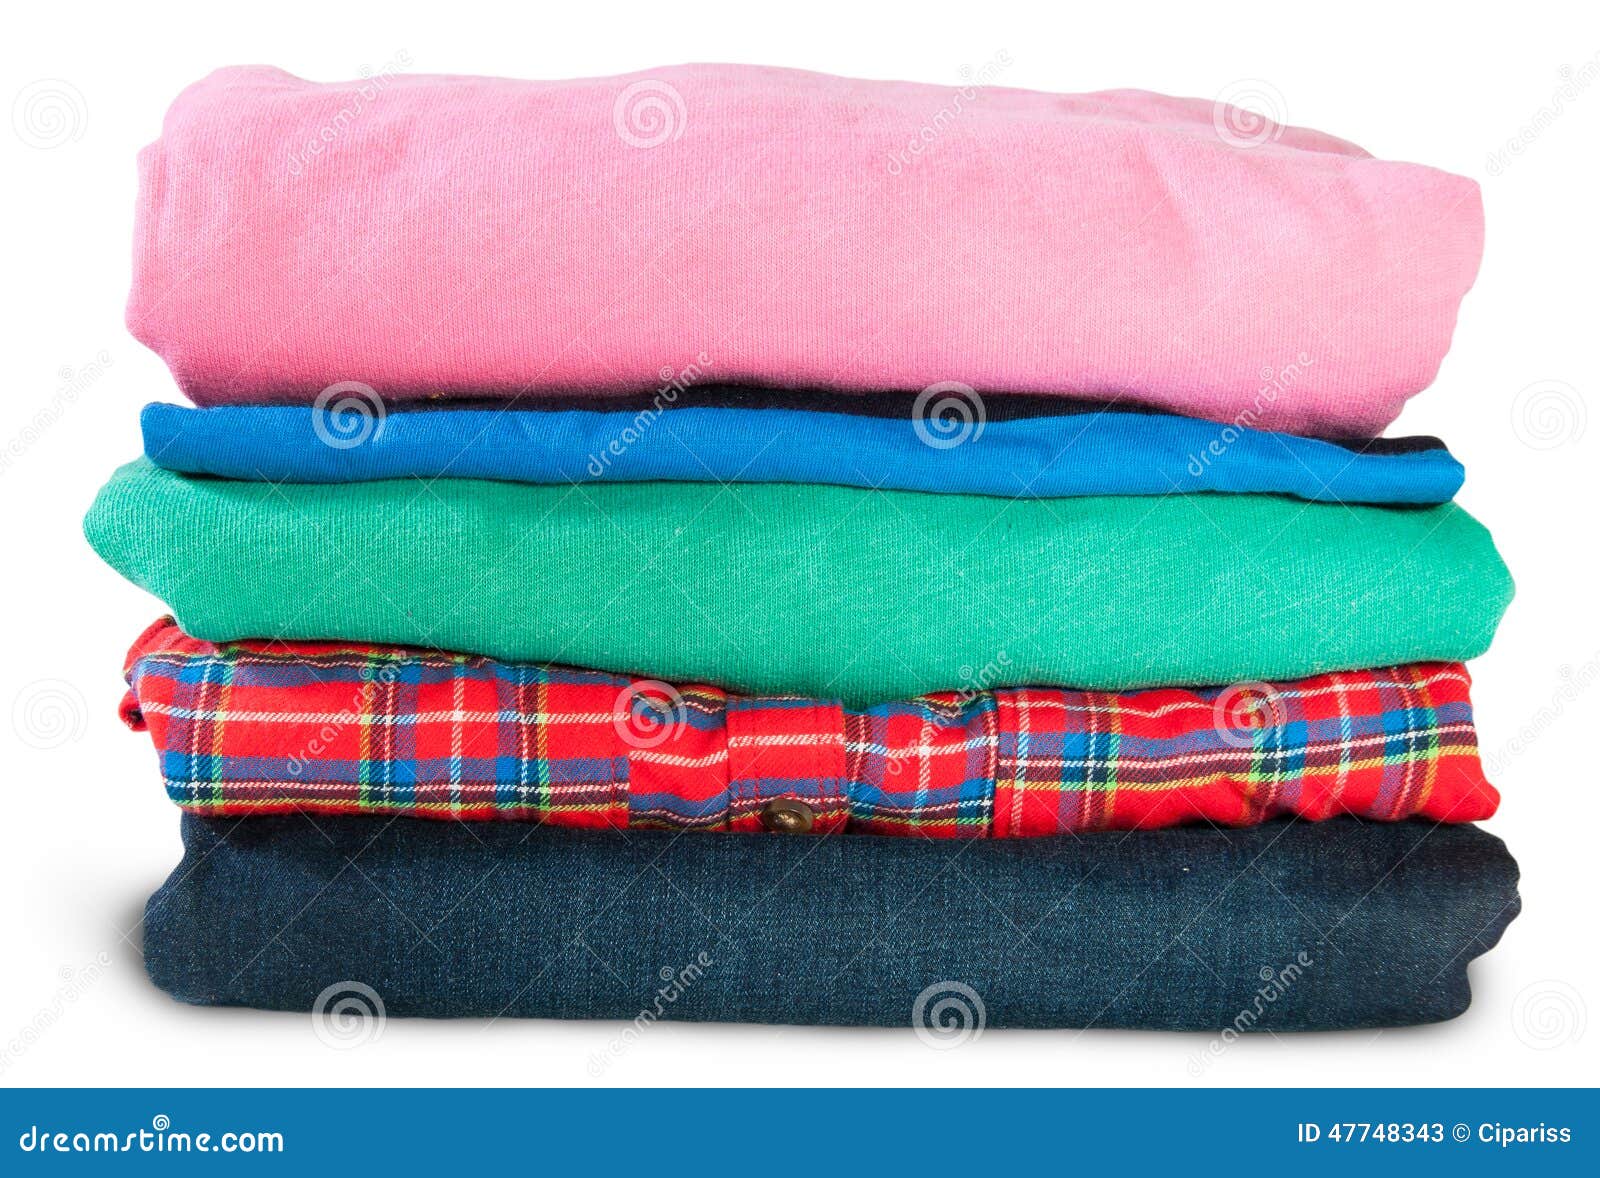 Stack of Five Types of Clothes Stock Image - Image of blue, plaid: 47748343